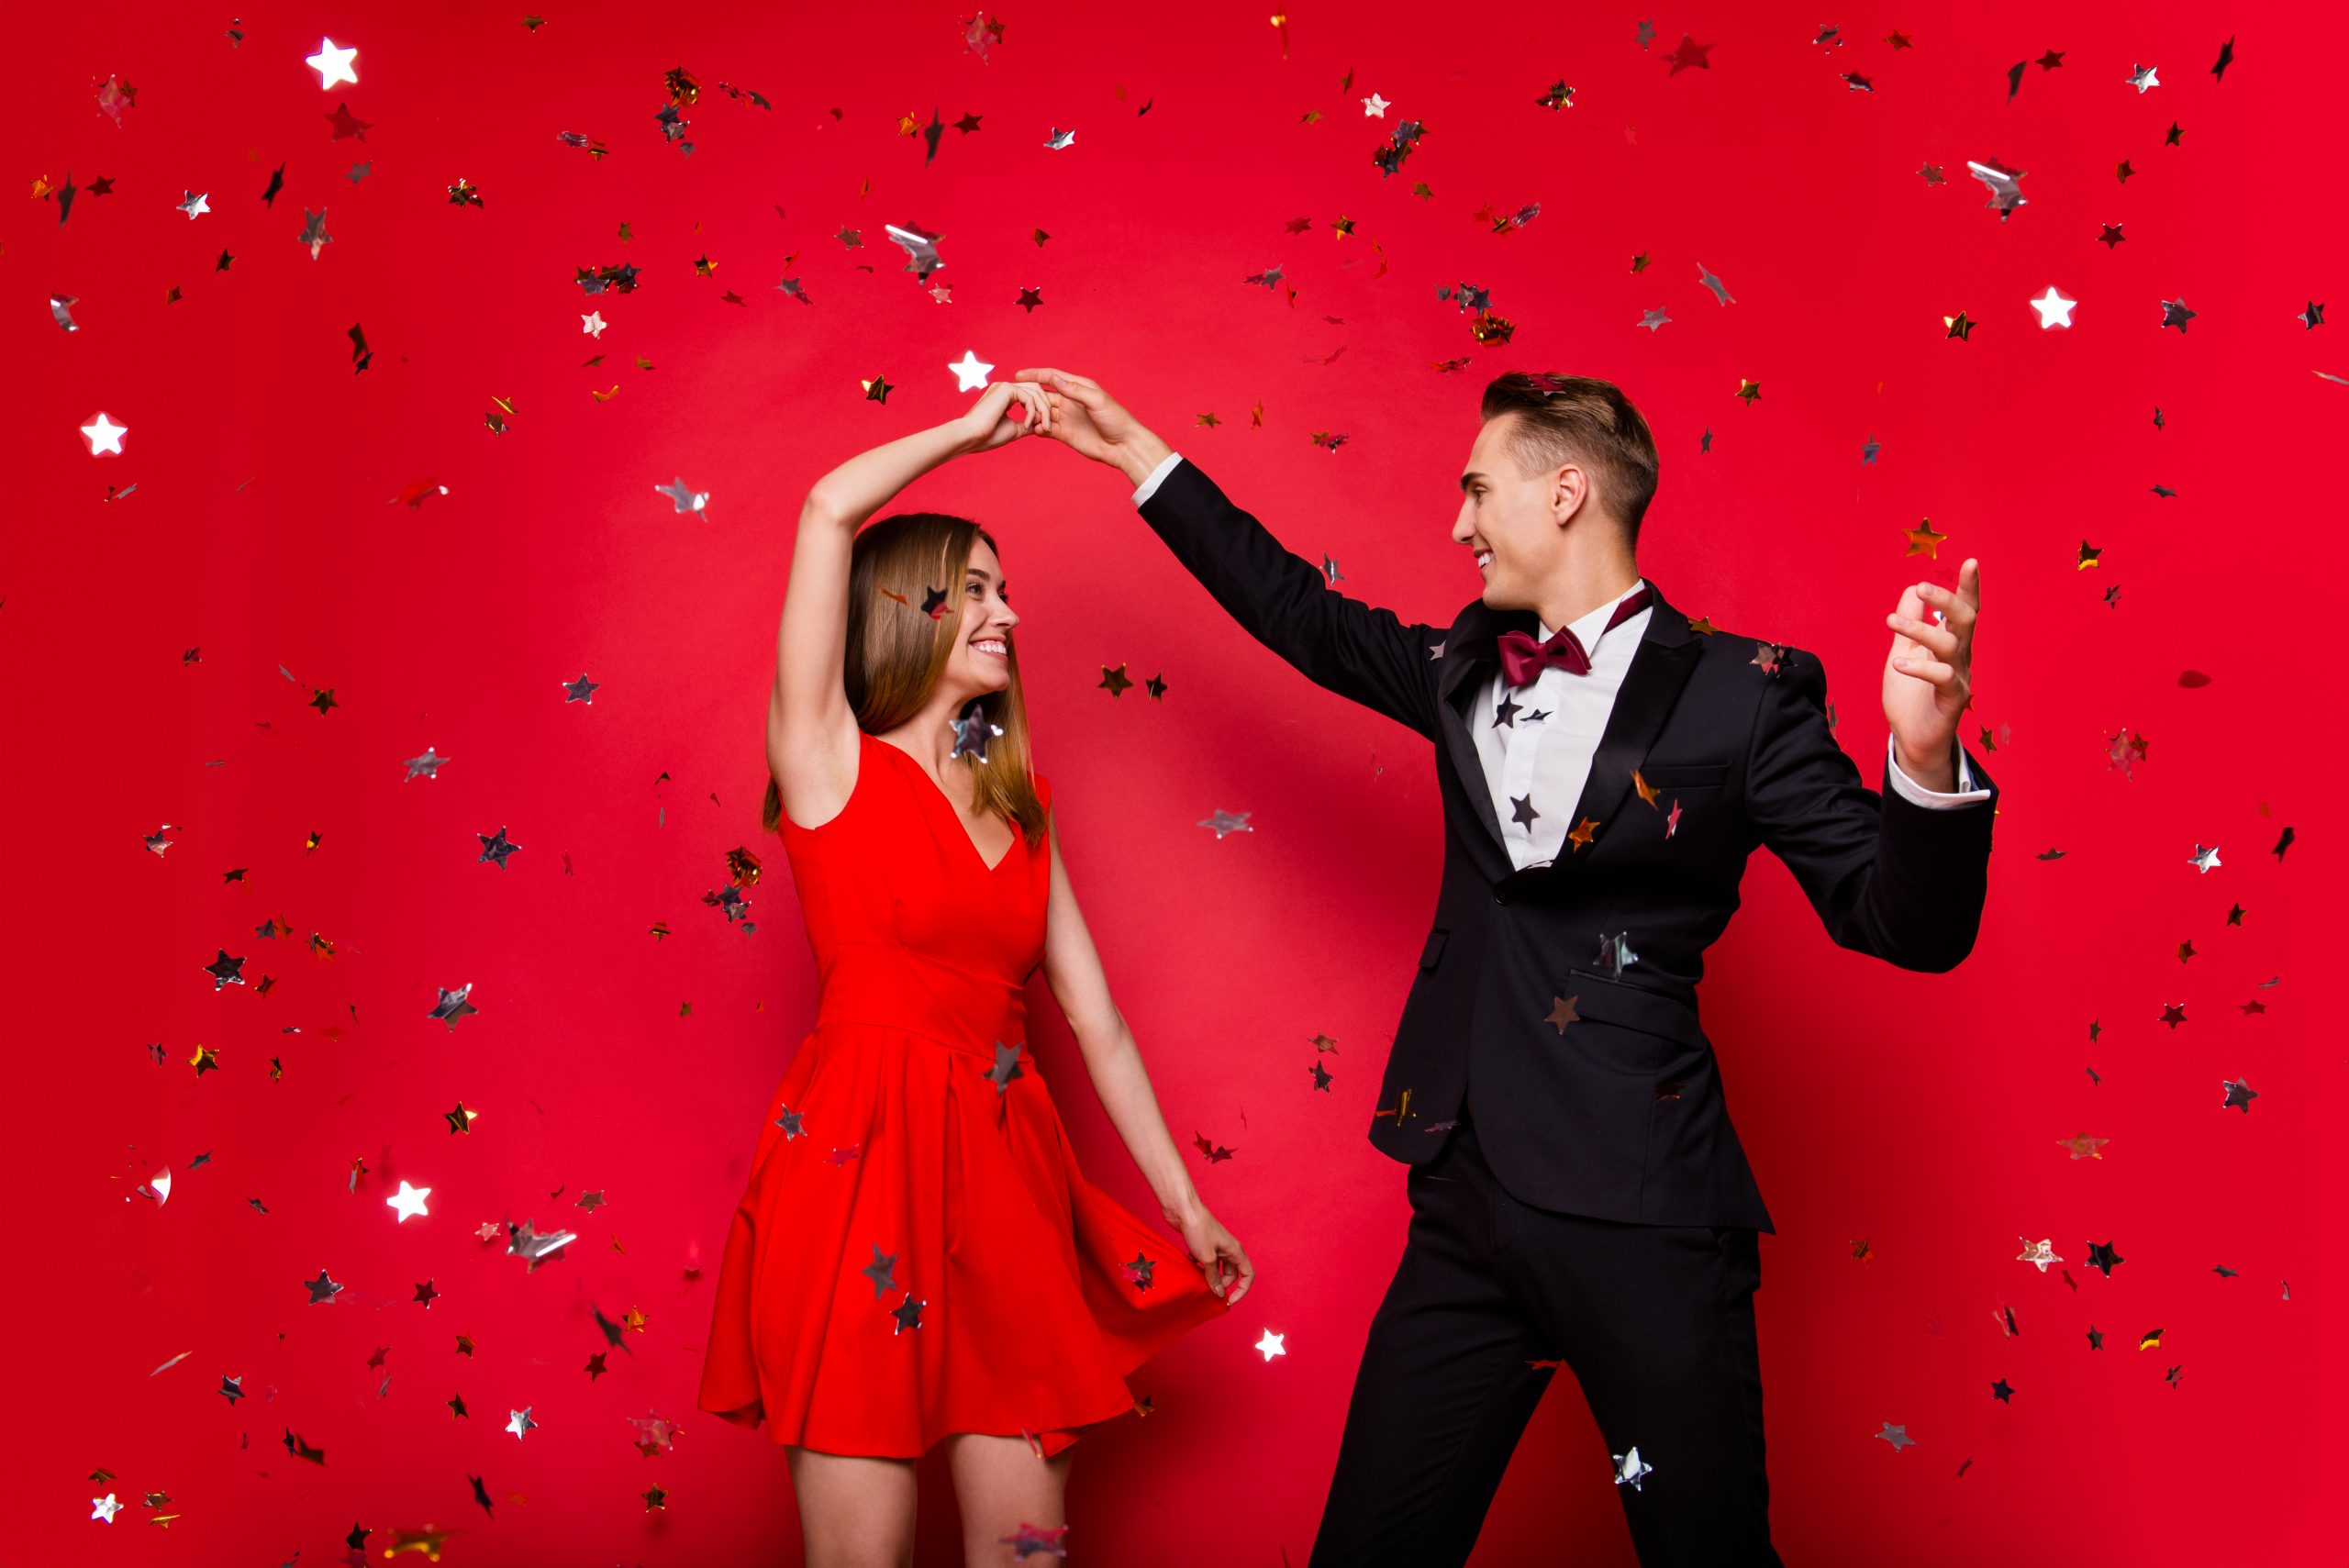 Portrait of two cool slim graceful adorable imposing attractive cheerful people friends rejoicing flying decorative elements glitter having fun isolated over bright vivid shine red background